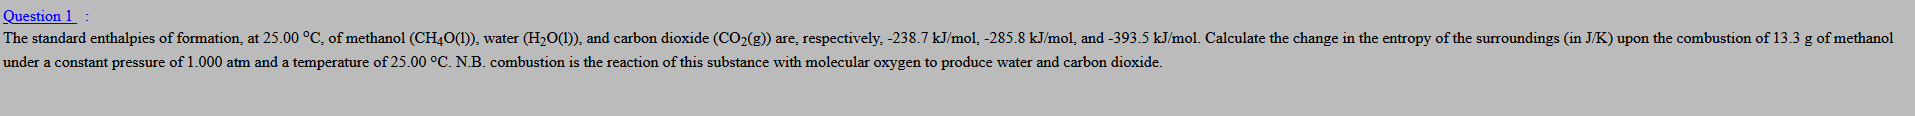 Question 1 :
The standard enthalpies of formation, at 25.00 °C, of methanol (CH40(1)), water (H2O(1)), and carbon dioxide (CO2(g)) are, respectively, -238.7 kJ/mol, -285.8 kJ/mol, and -393.5 kJ/mol. Calculate the change in the entropy of the surroundings (in J/K) upon the combustion of 13.3 g of methanol
under a constant pressure of 1.000 atm and a temperature of 25.00 °C. N.B. combustion is the reaction of this substance with molecular oxygen to produce water and carbon dioxide.
